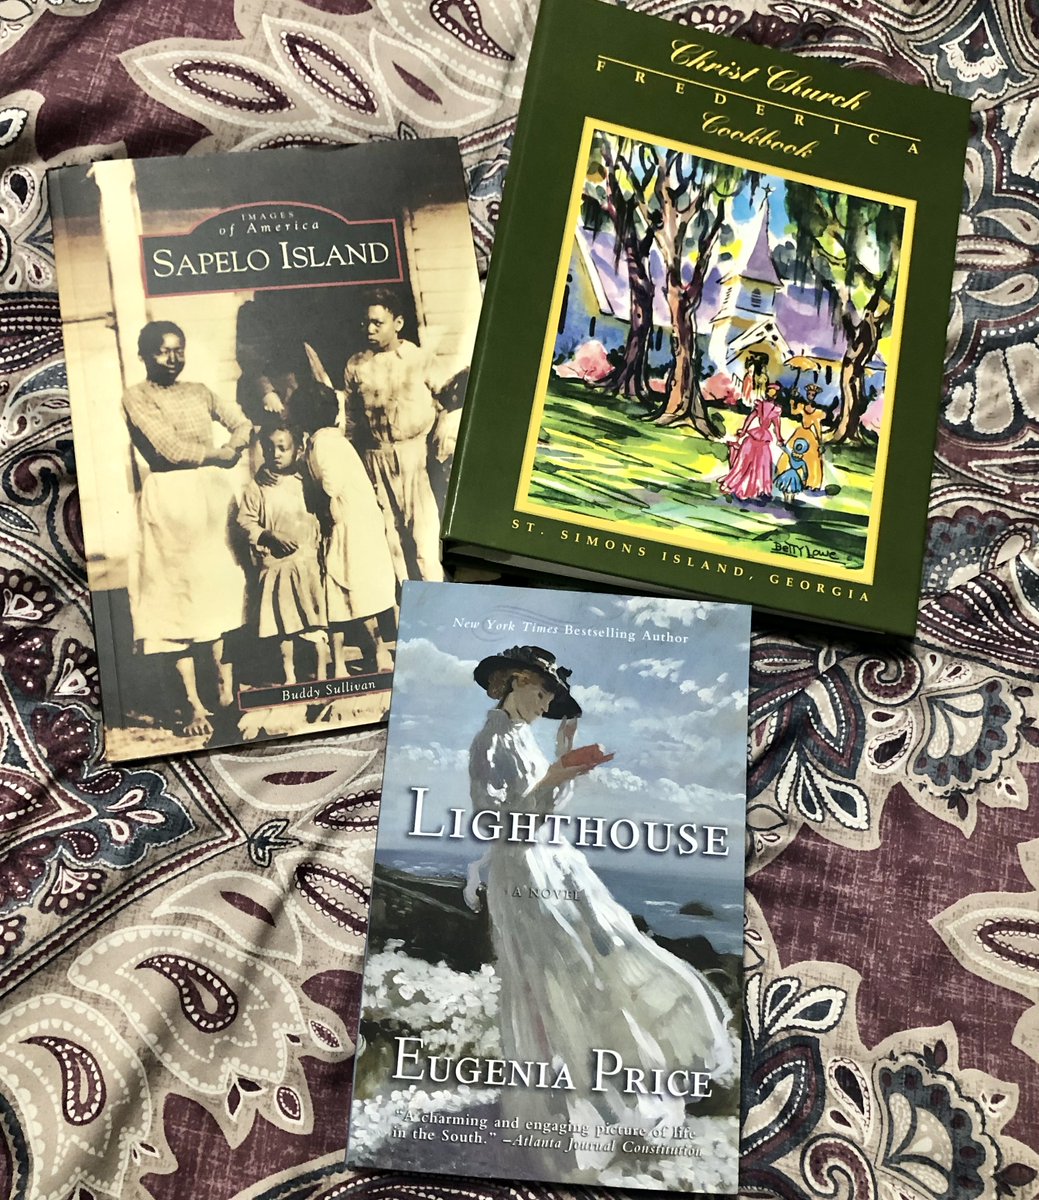 Read about my recent girls' trip to St. Simons Island, Georgia, and why I think #BOOKS make the best souvenirs: authorskicklighter.wordpress.com/2023/10/26/boo…

#booklovers #souvenirs #bookworm #bookdragon #bookclub #bookrecommendation #bookishgifts #stsimonsisland #Georgia #bestiesforlife